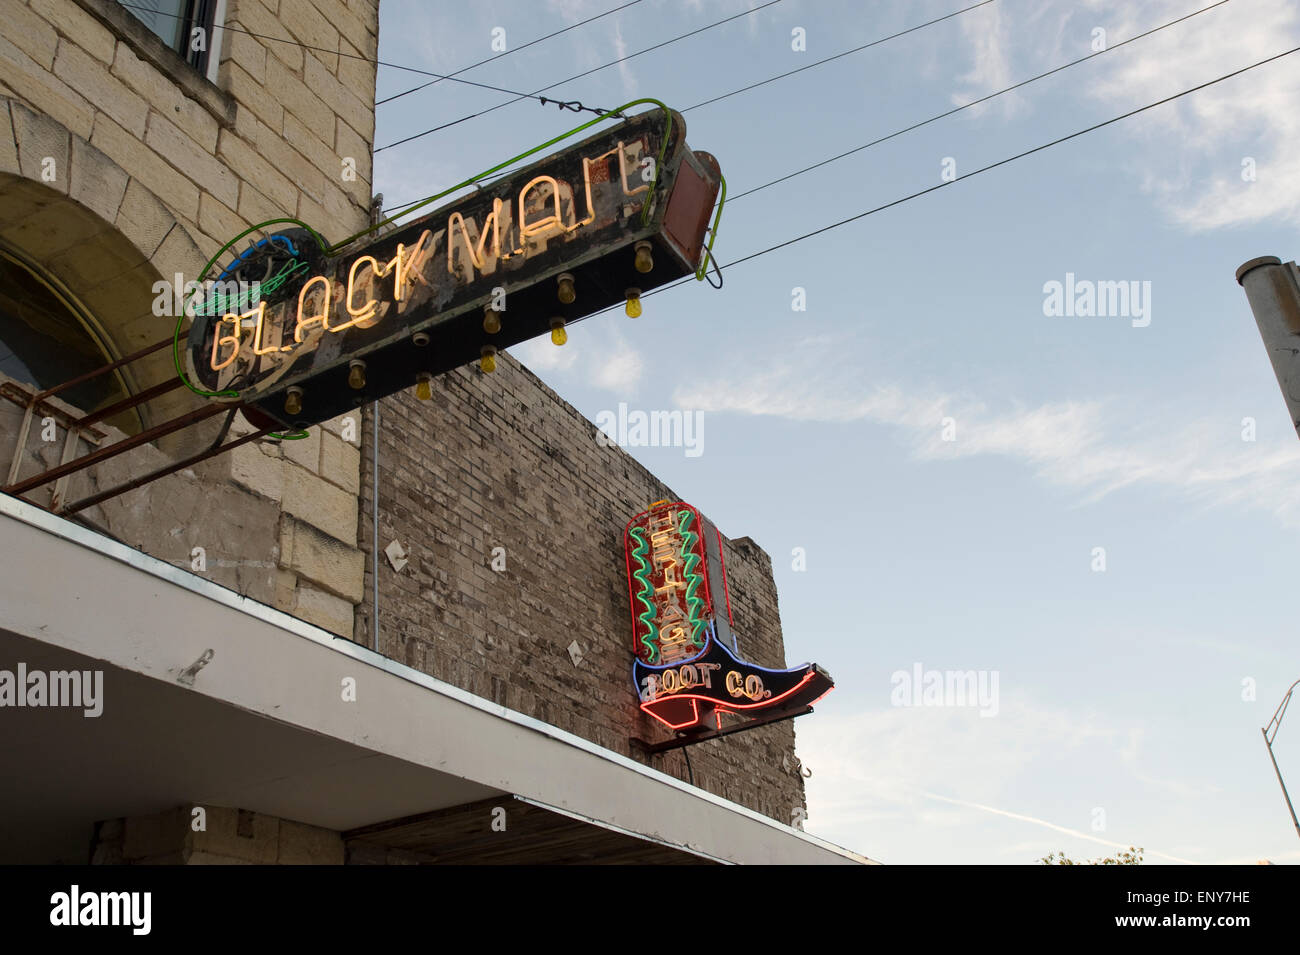 Neon signs of Blackmail, a boutique and Hertitage Boot Company, located in SoCo (South Congress) section of Austin TX Stock Photo